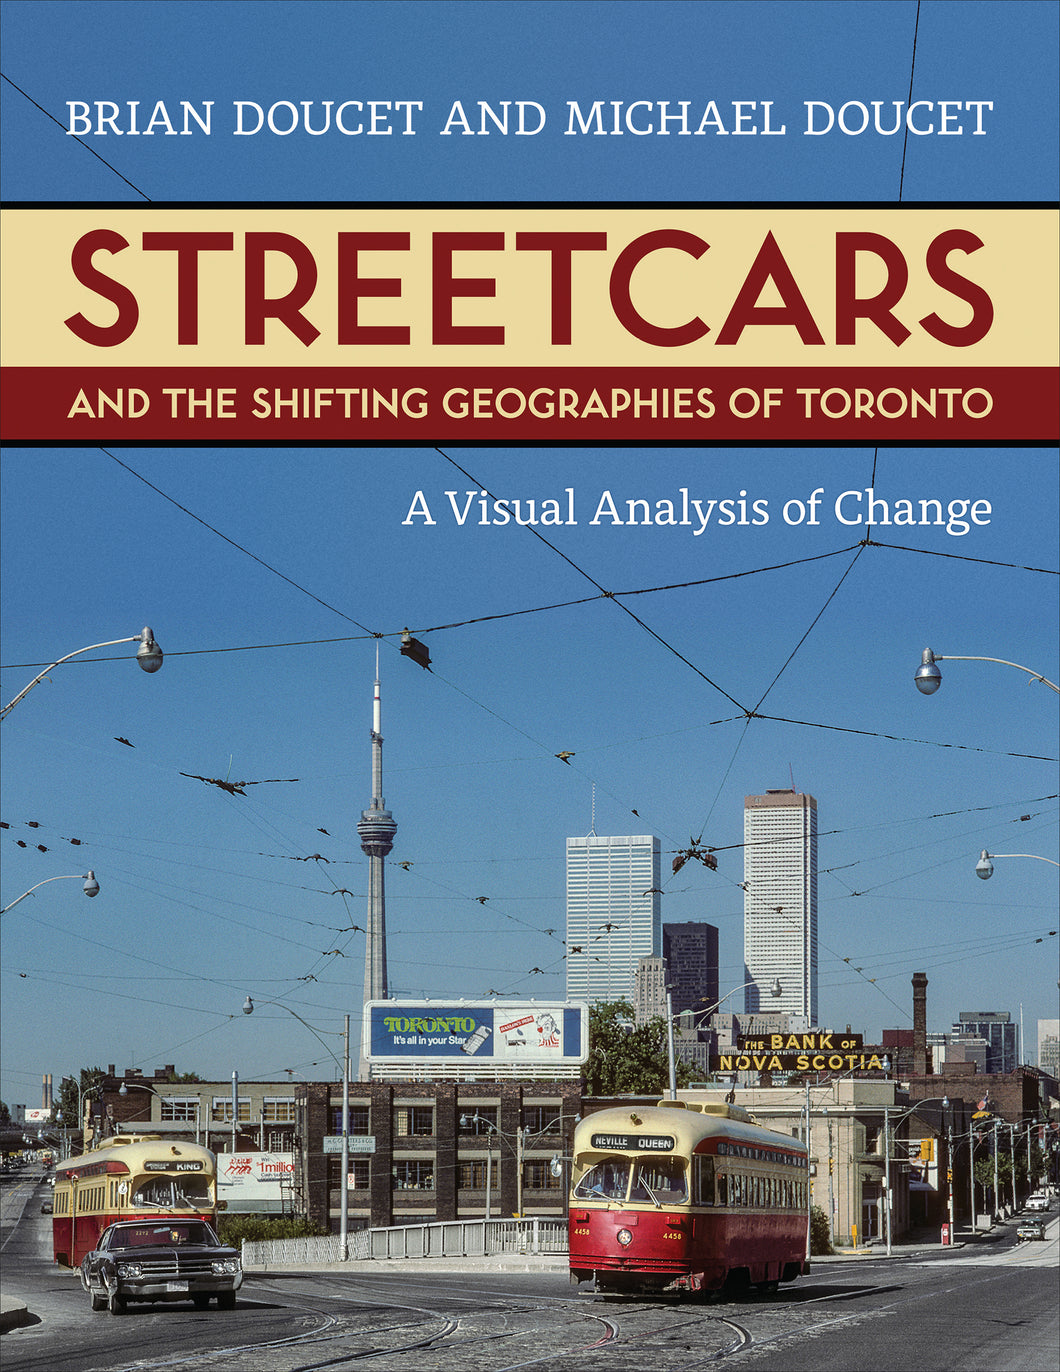 Streetcars and the Shifting Geographies of Toronto